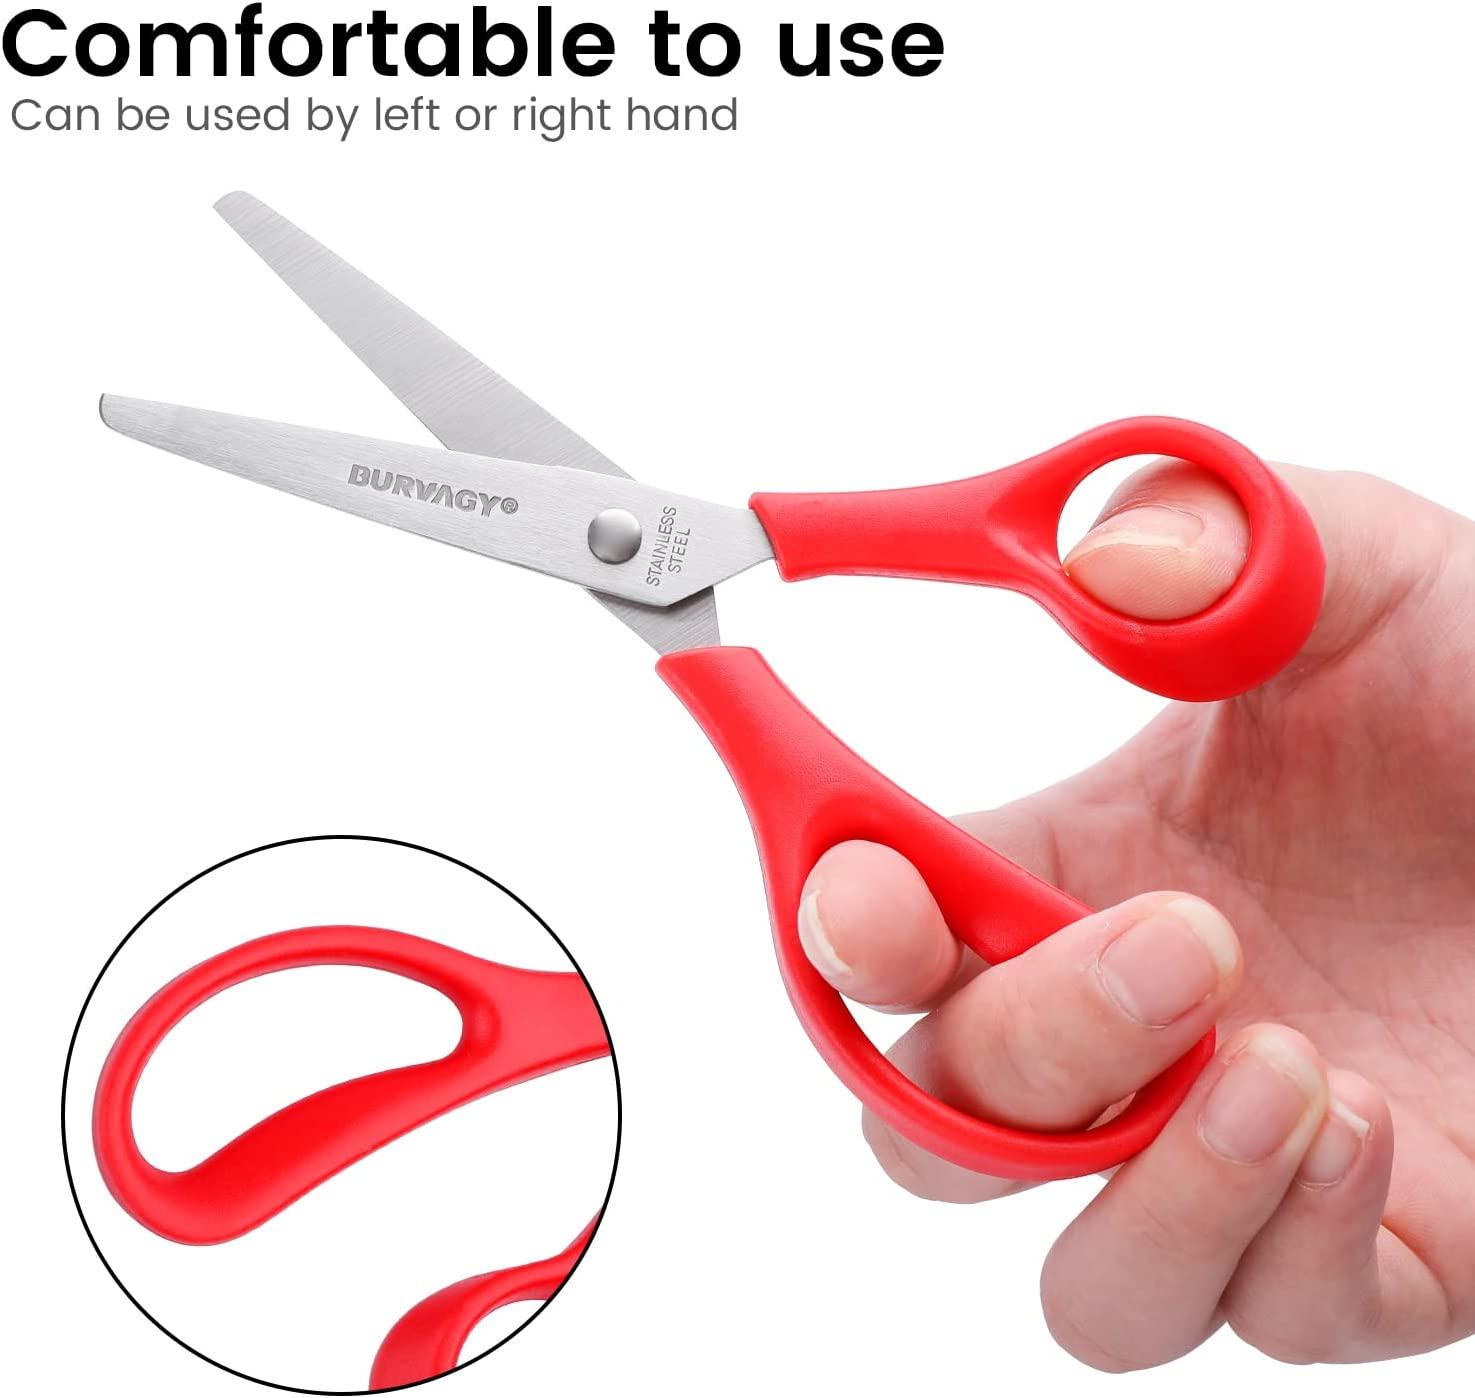 Scissors Bulk 6-Pack, All Purpose Scissors Stainless Steel Sharp Scissors for Office Home General Use Craft Supplies, High/Middle School Classroom